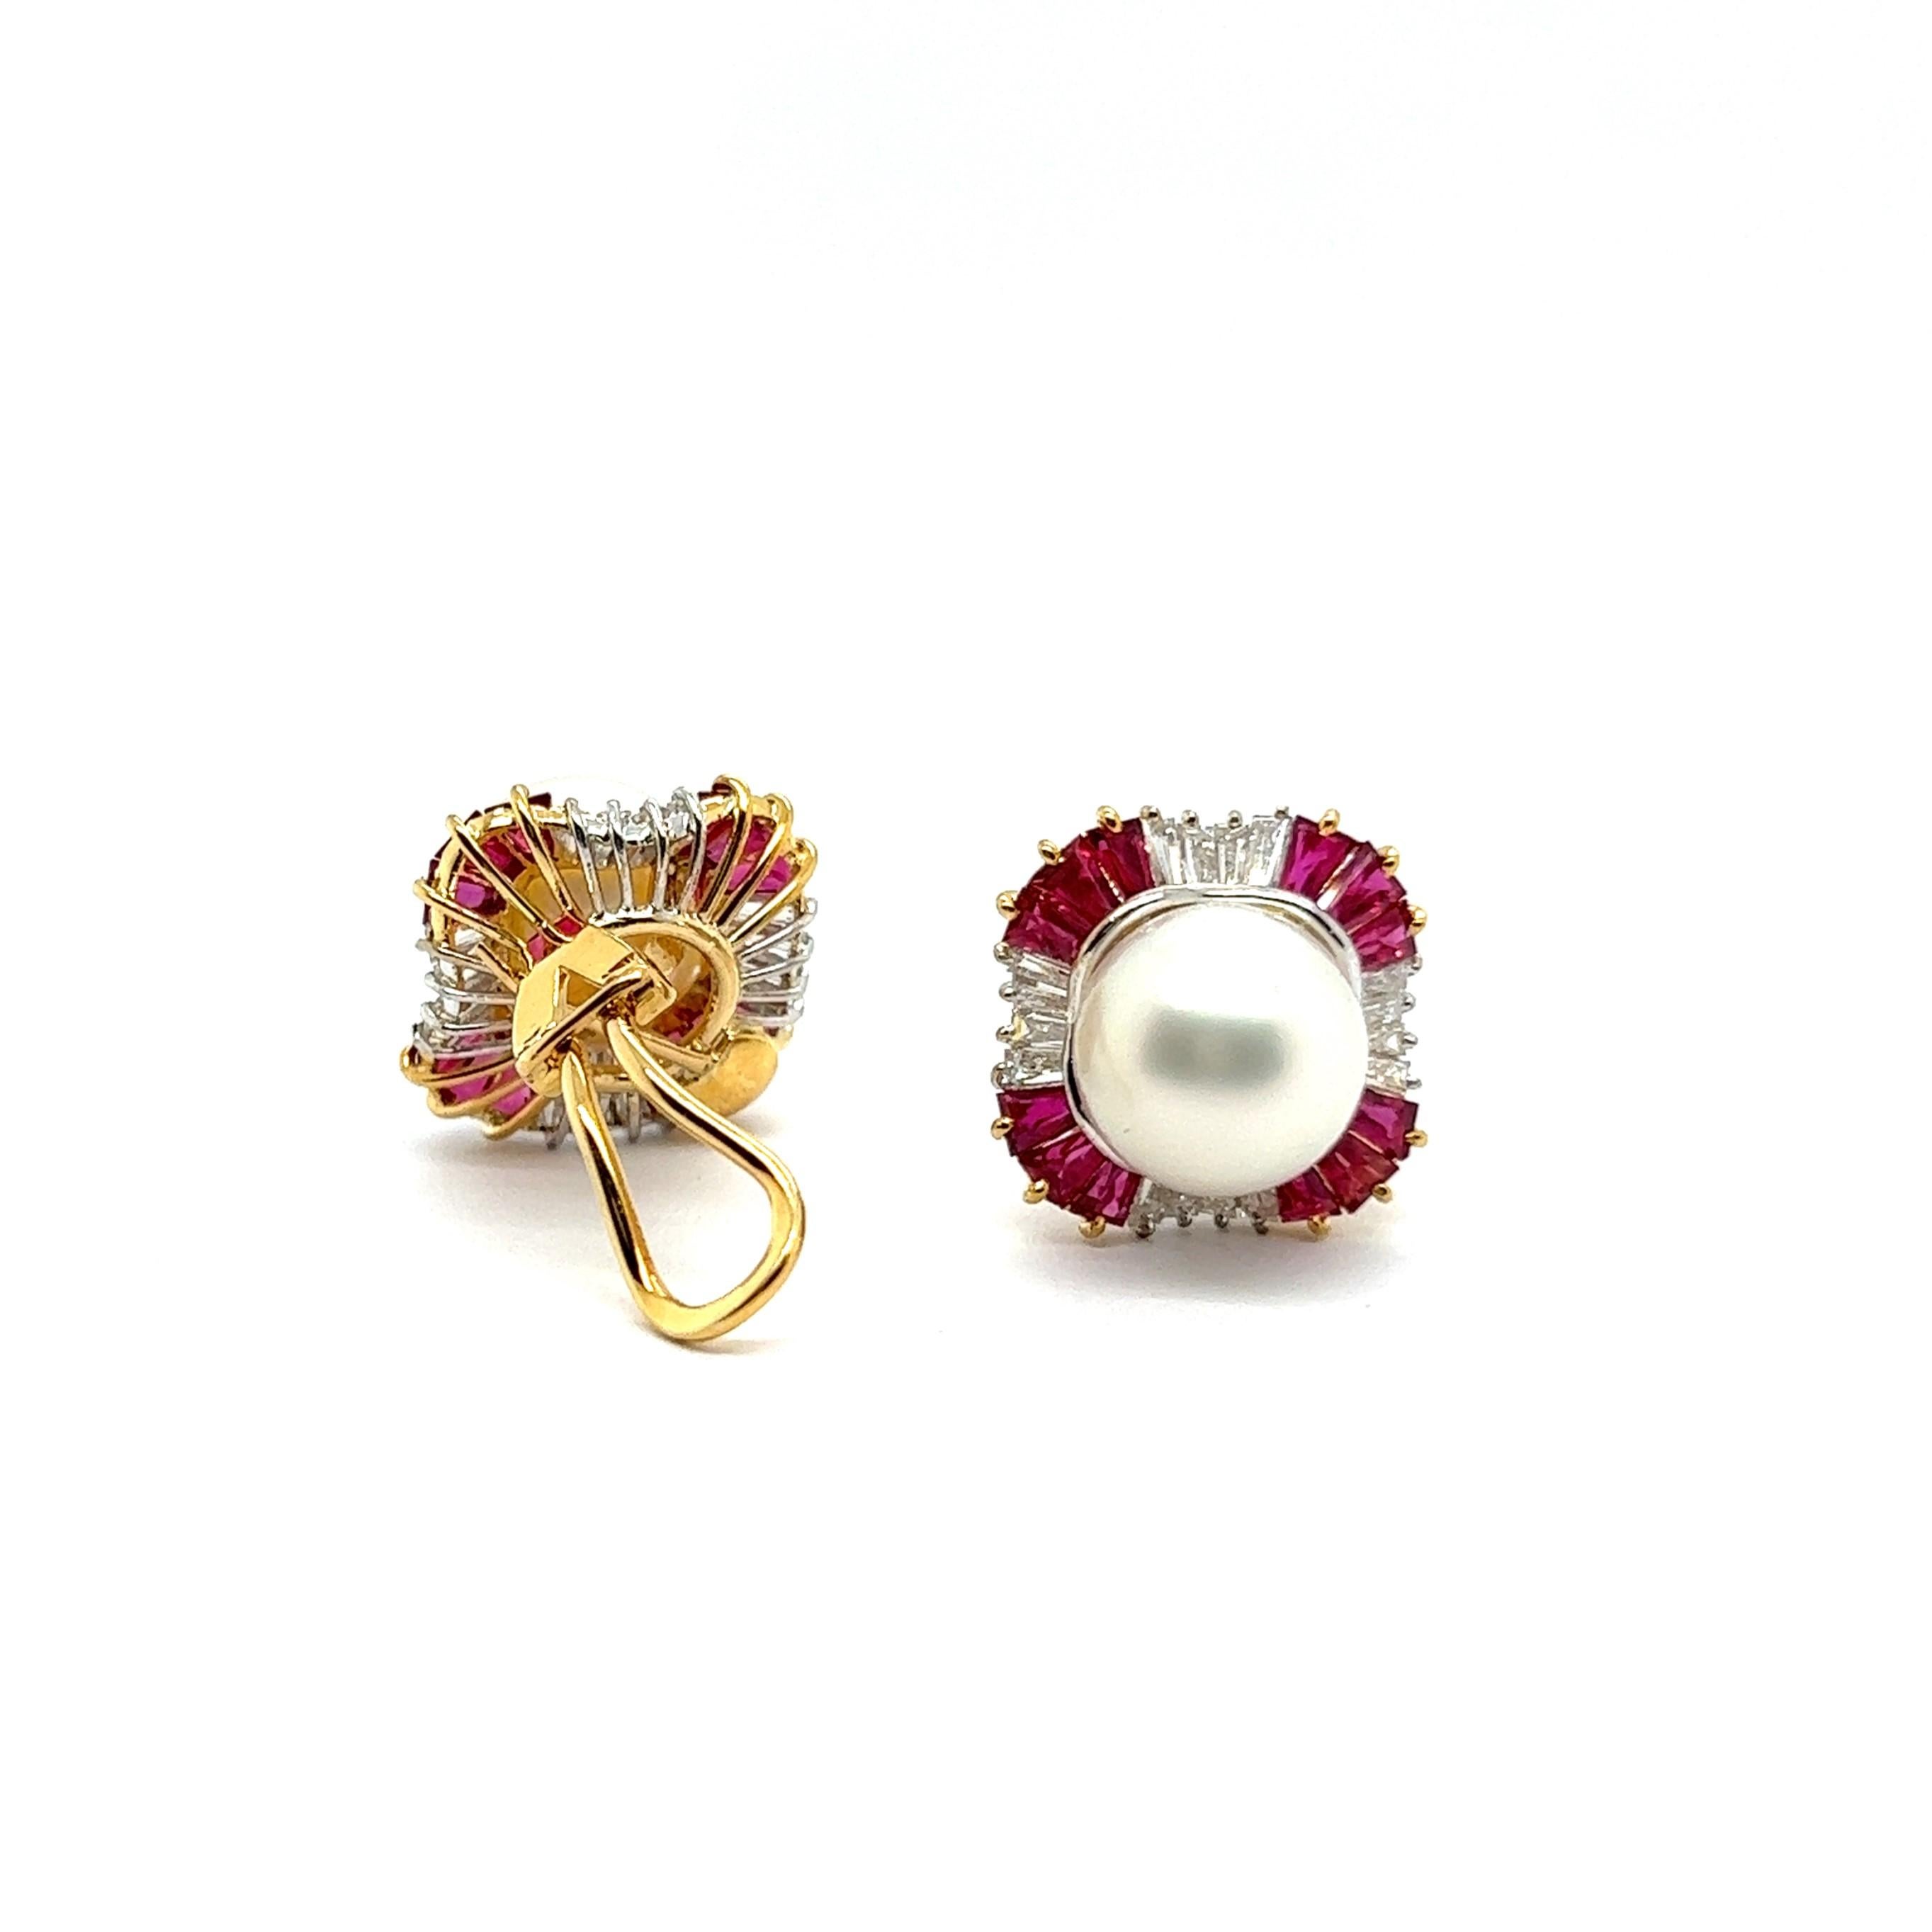 Clip-on Earrings with Pearls, Rubies & Diamonds in 18 Karat Yellow & White Gold For Sale 7